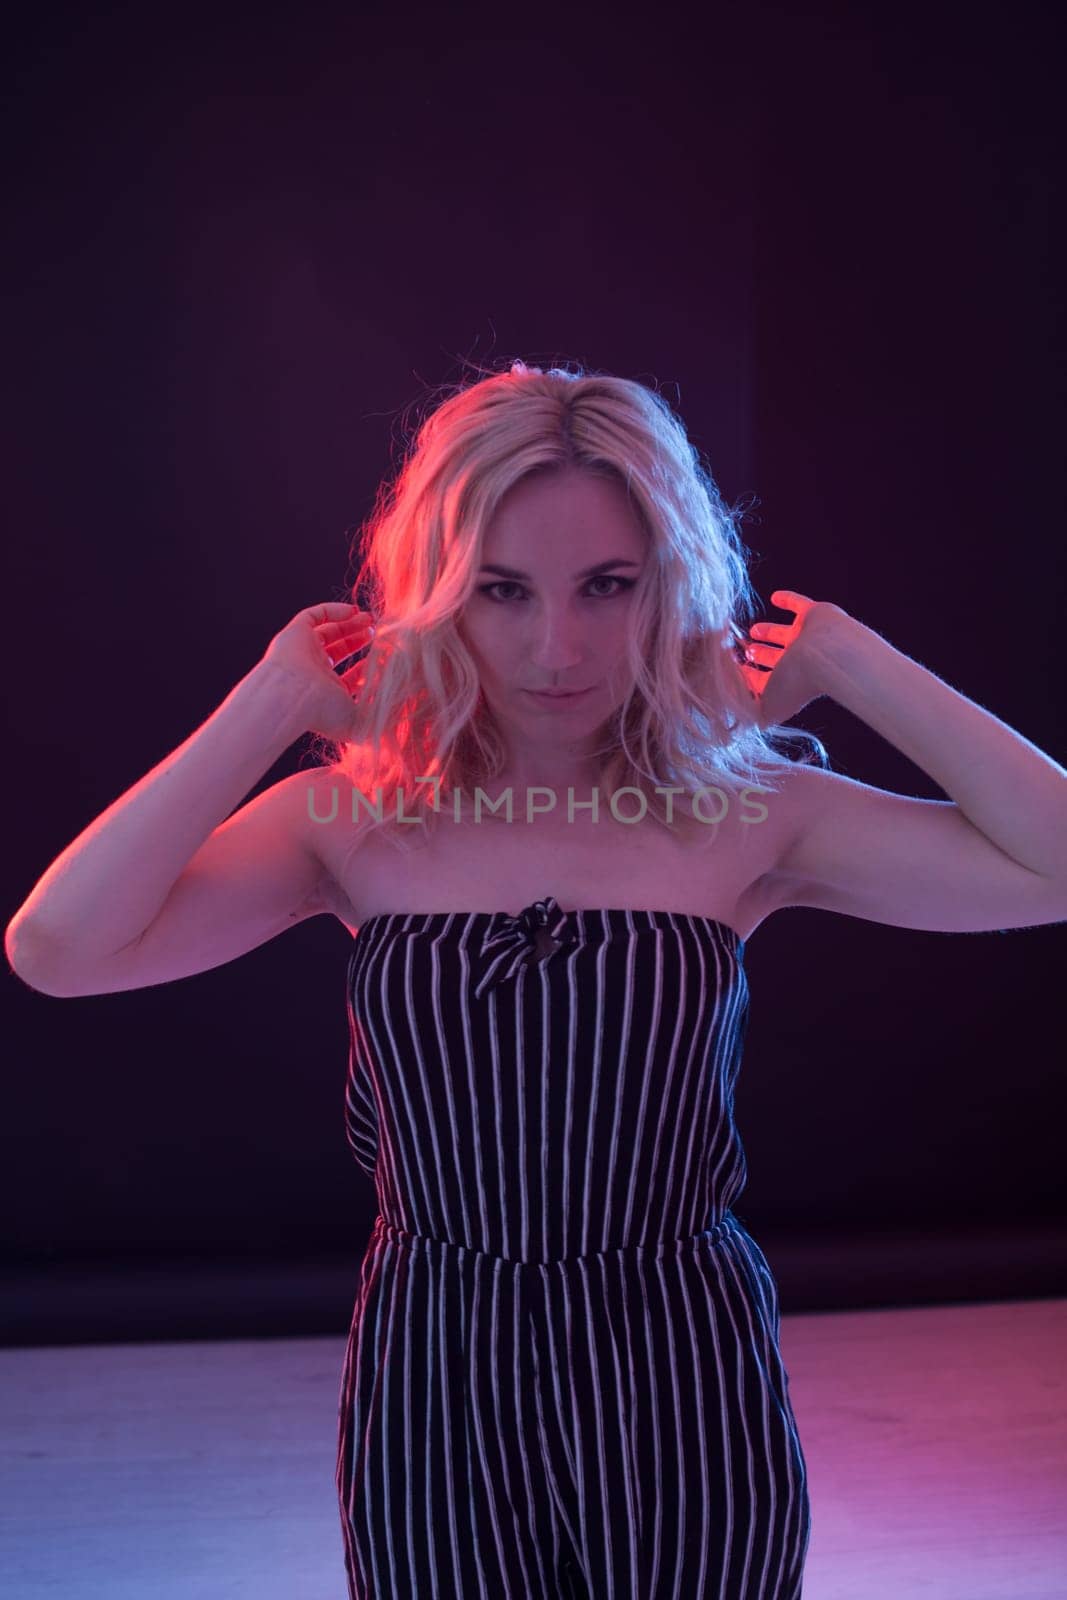 Portrait of a beautiful fashionable blonde woman in striped clothes by Simakov